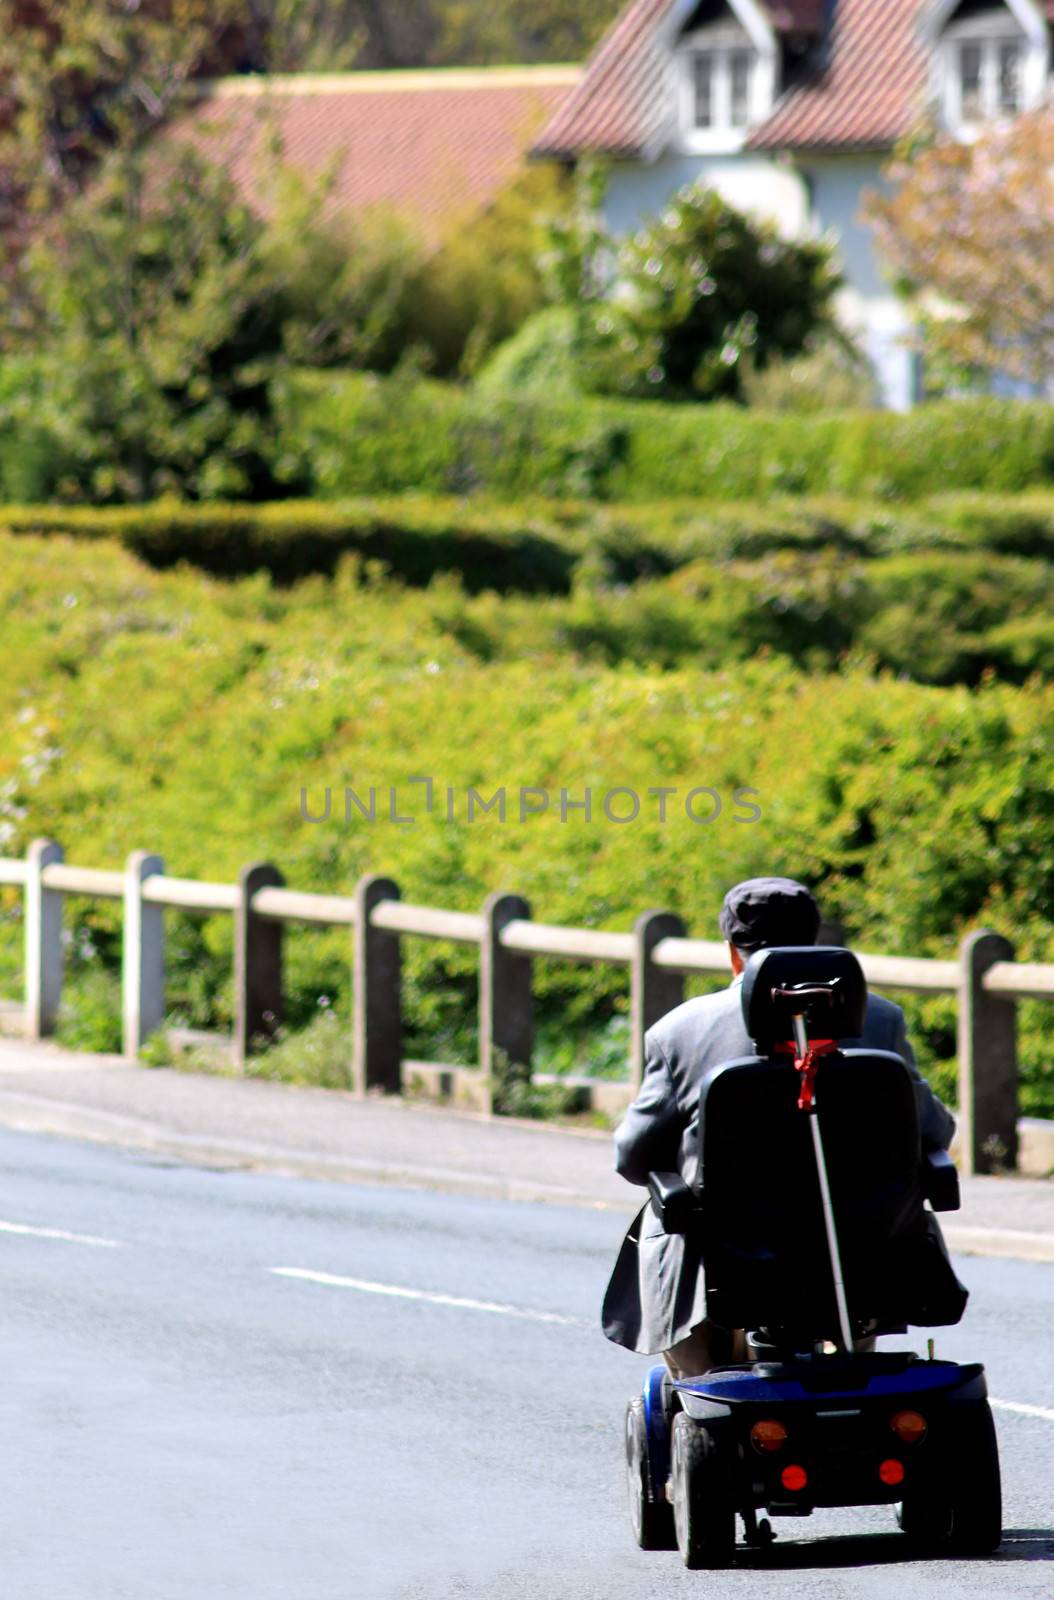 Rear view or senior man riding mobility scooter on countryside road.